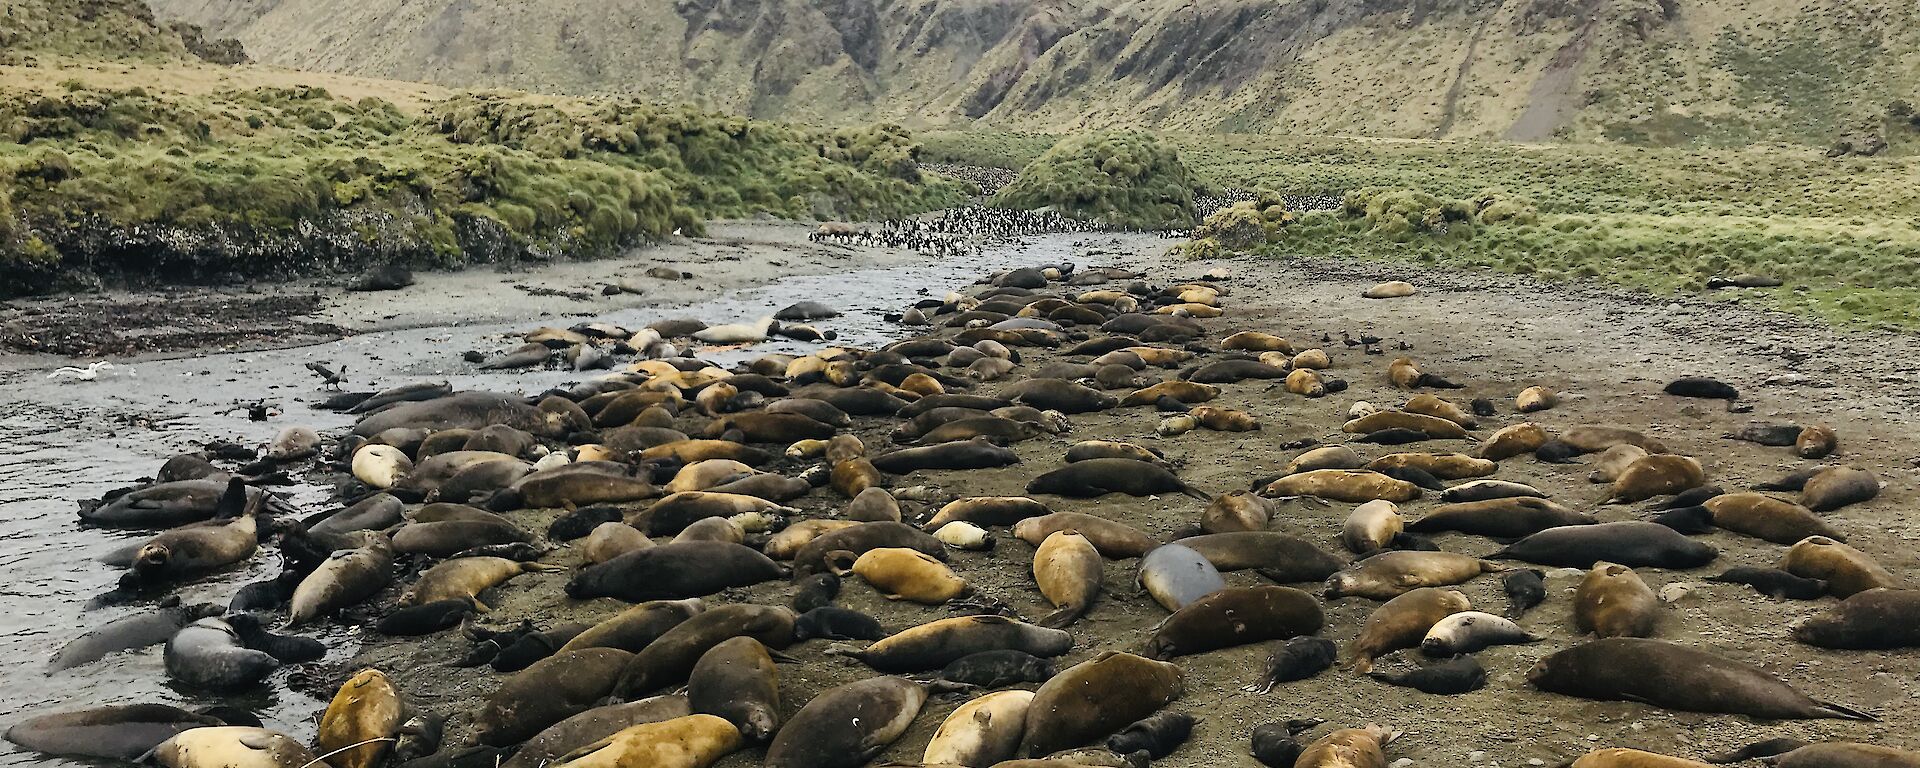 A large group of seals wallow in a brown creek